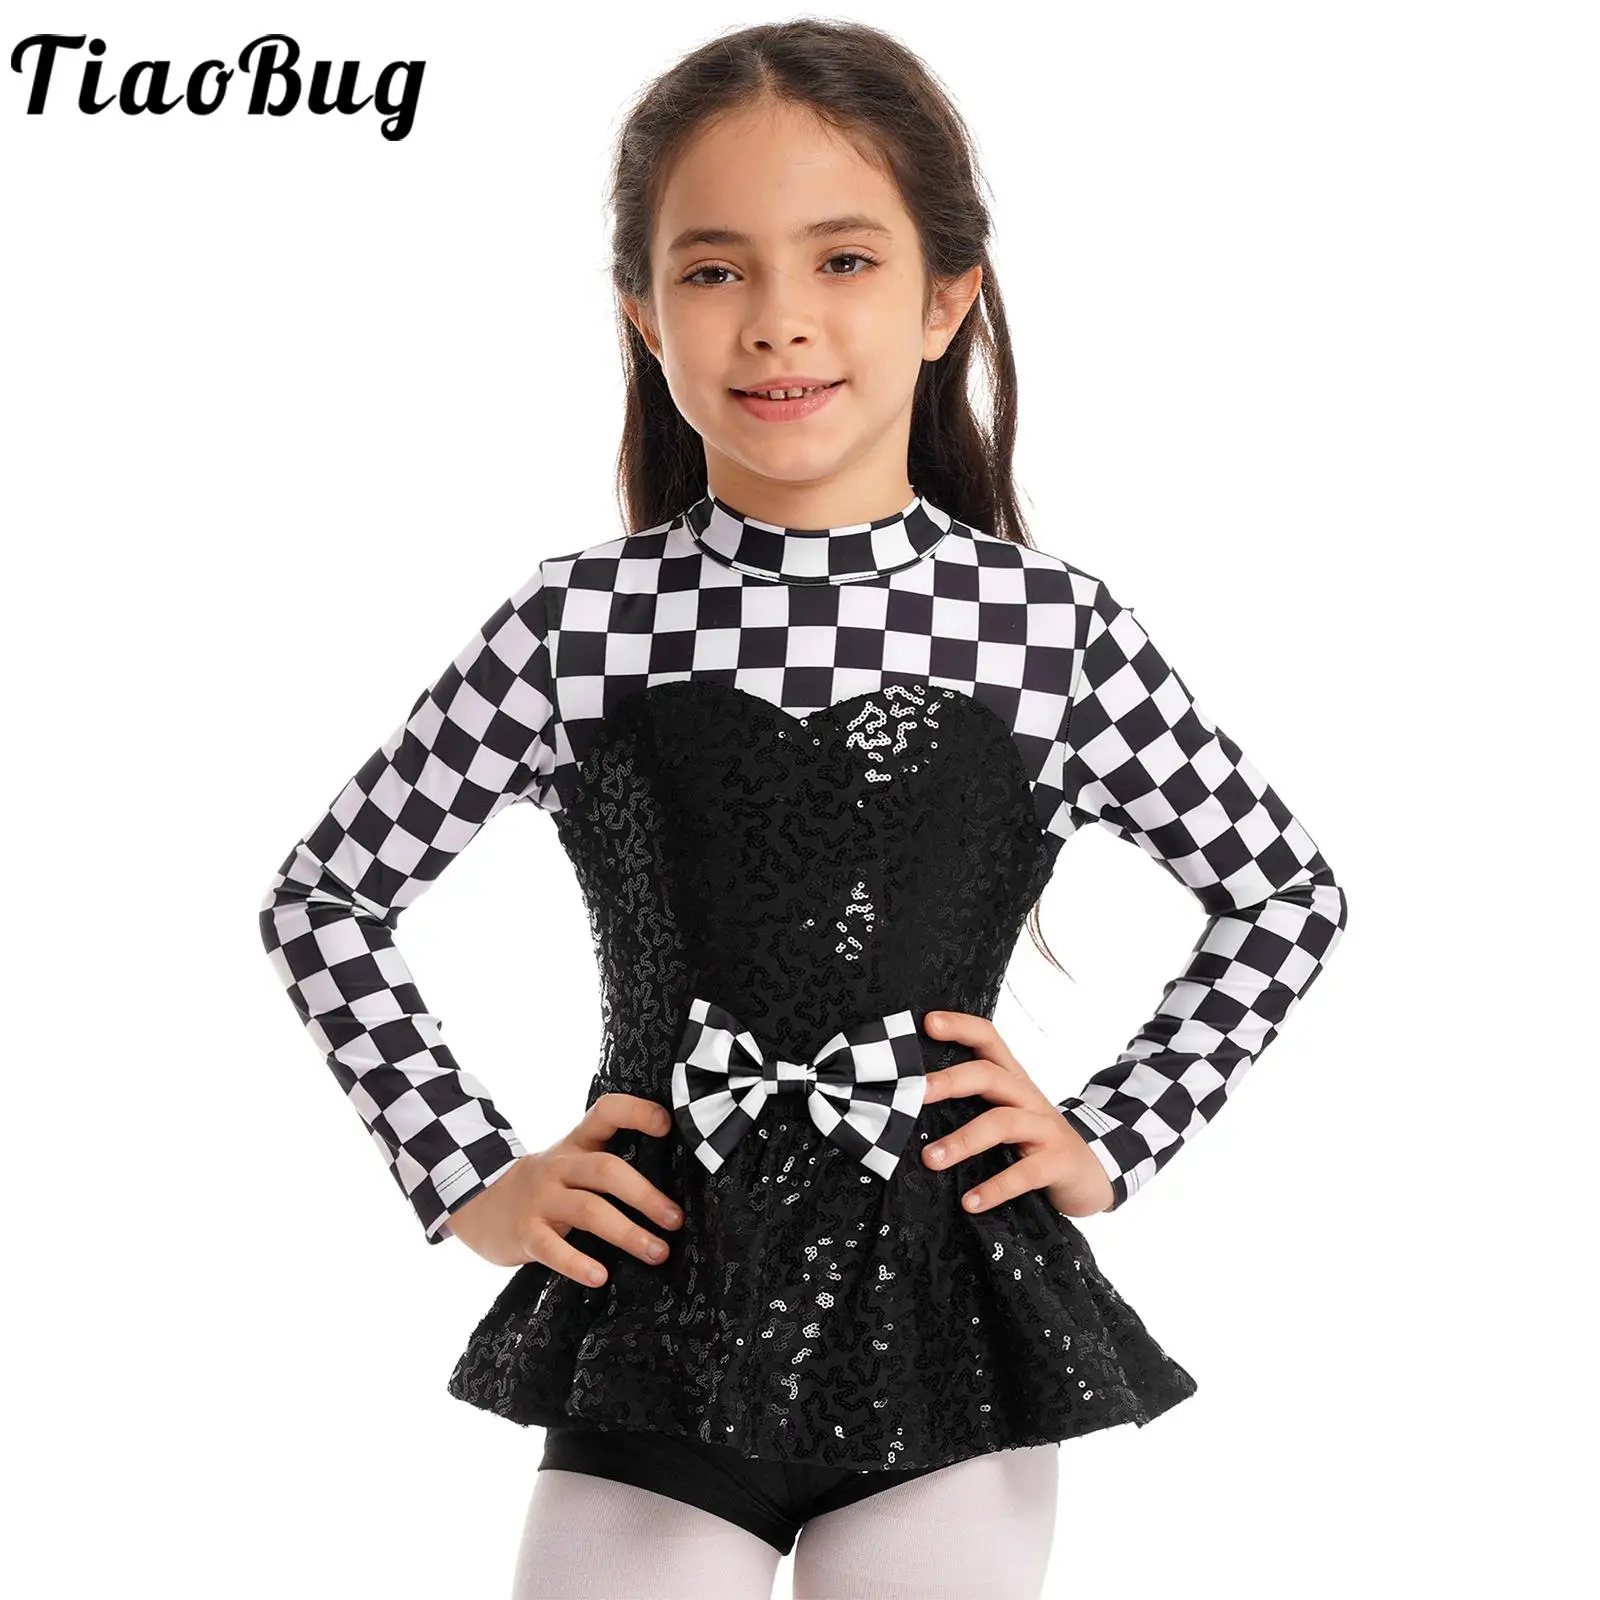 Kids Girls Race Car Driver Costume Child Racing Long Sleeve Sequins Tutu Dress Halloween Cosplay Party Carnival Fancy Dress Up